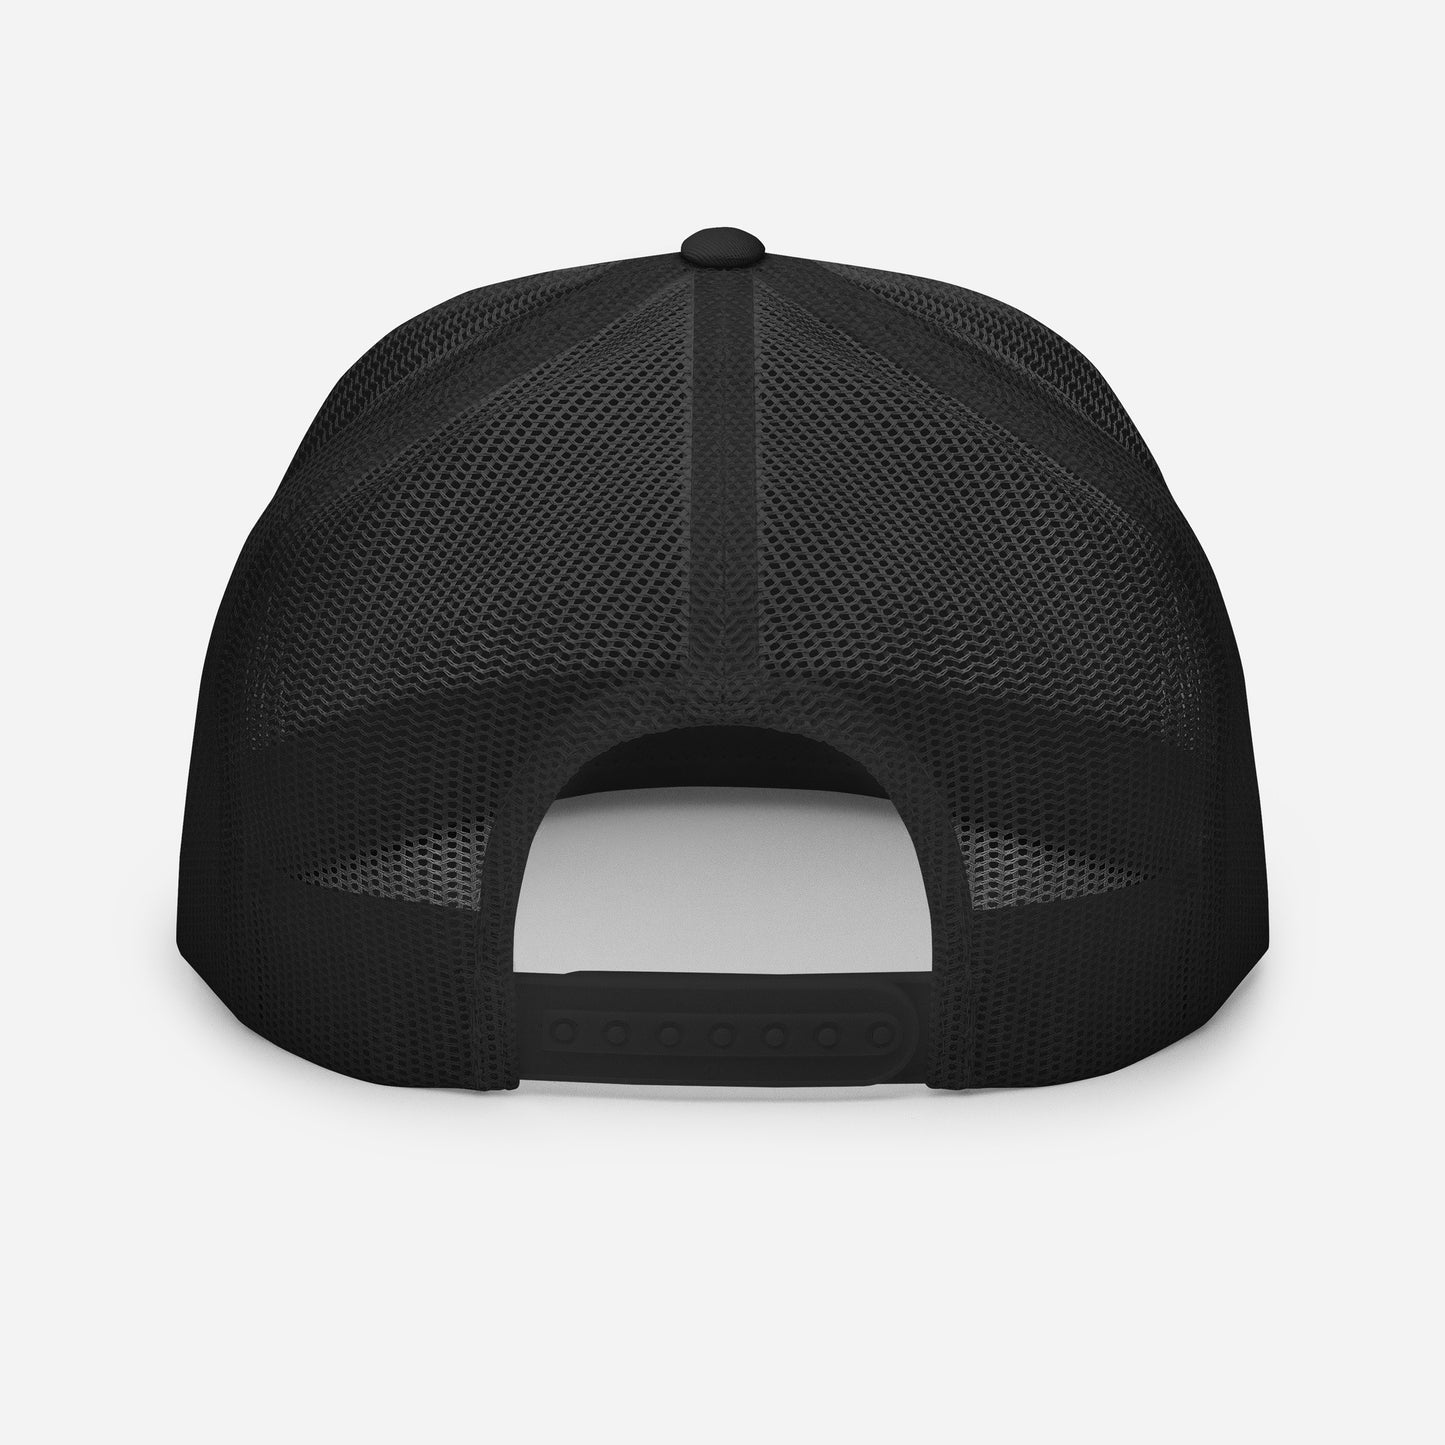 Los Angeles Upside Down Arch High 5 Panel A-Frame Snapback Trucker Hat